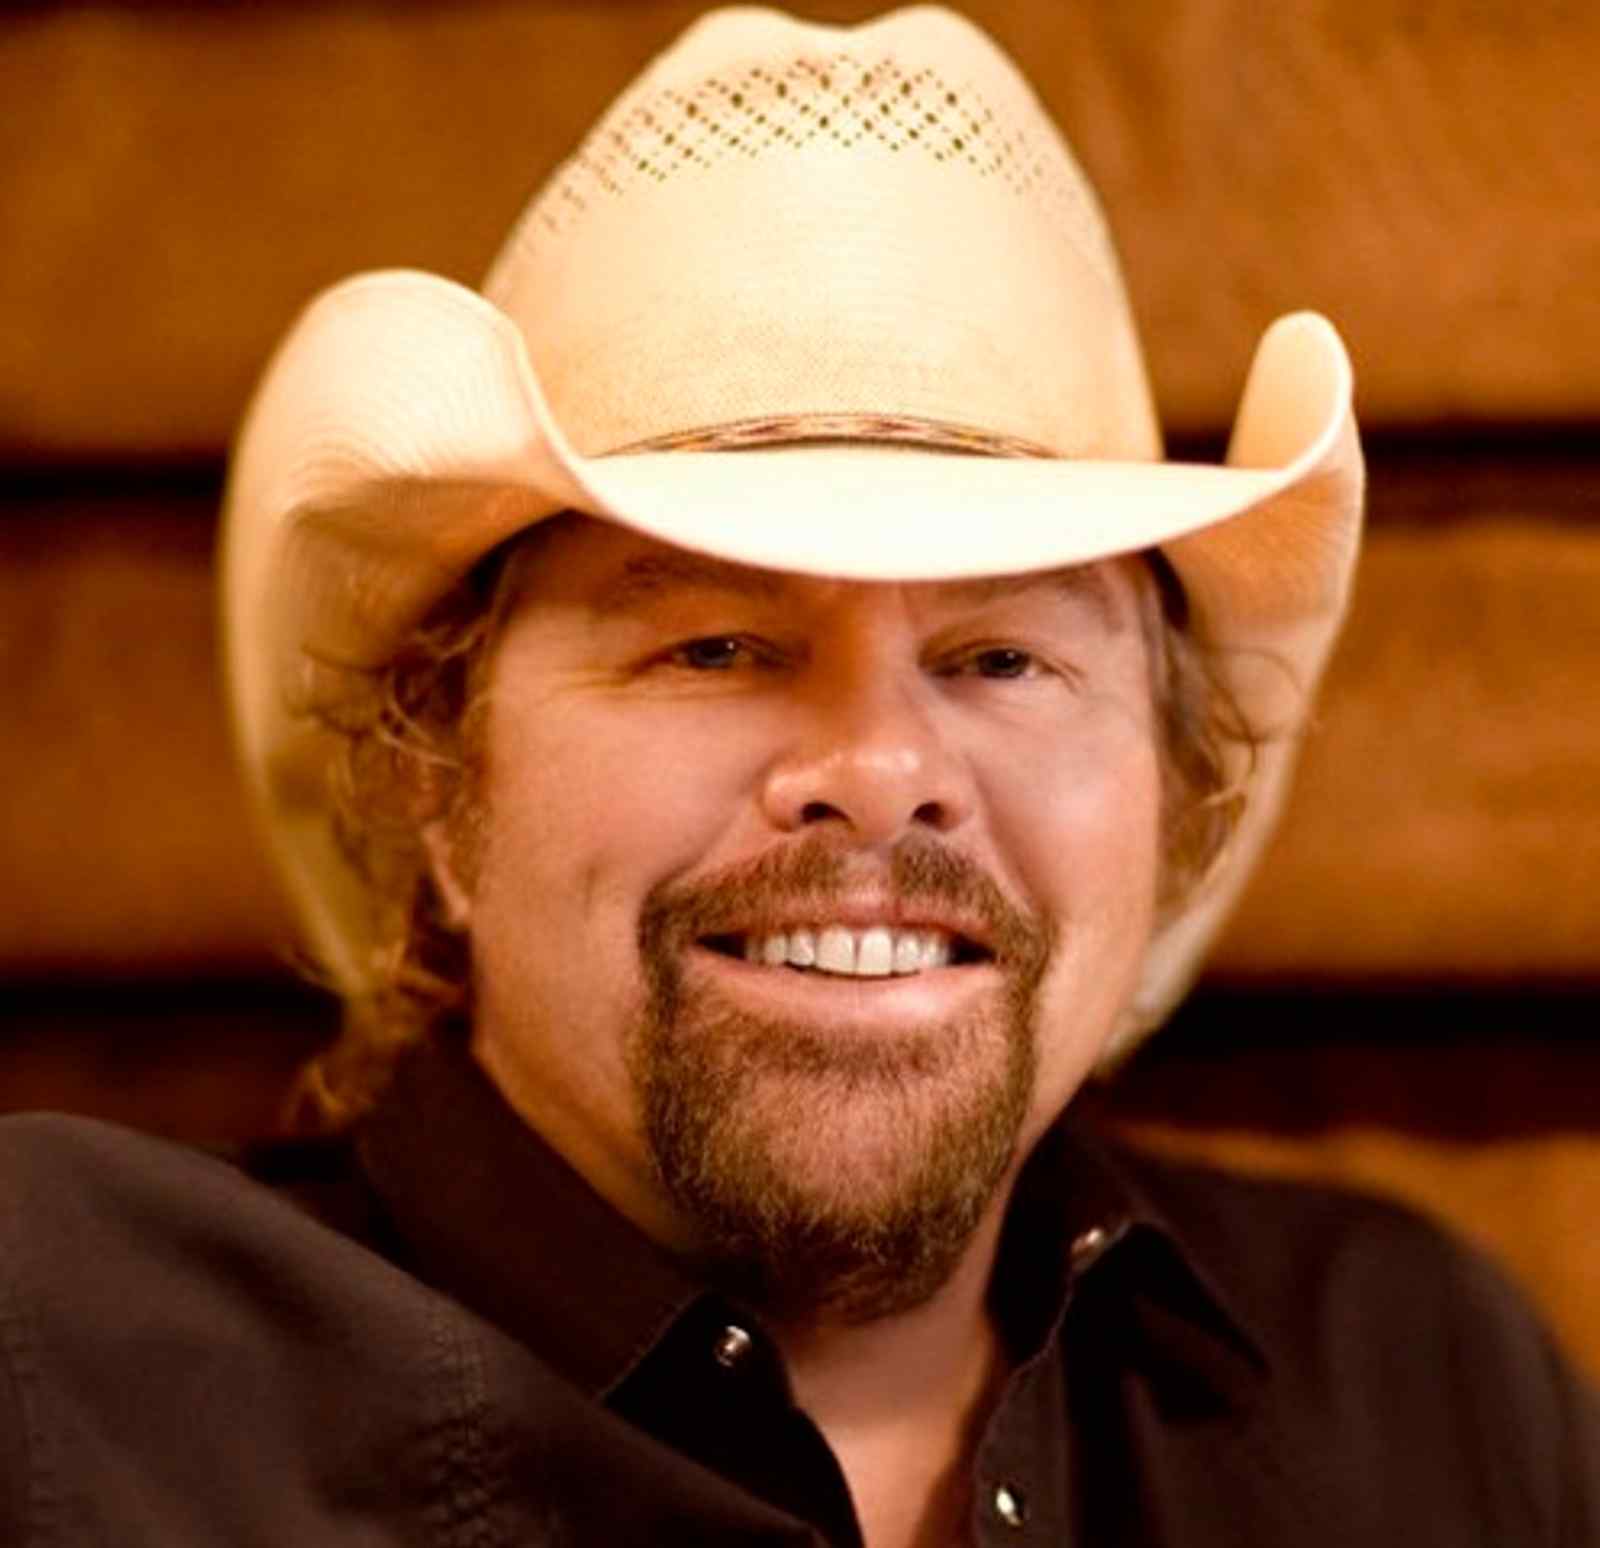 Toby Keith's "American Soldier" Gets High Gloss Shine